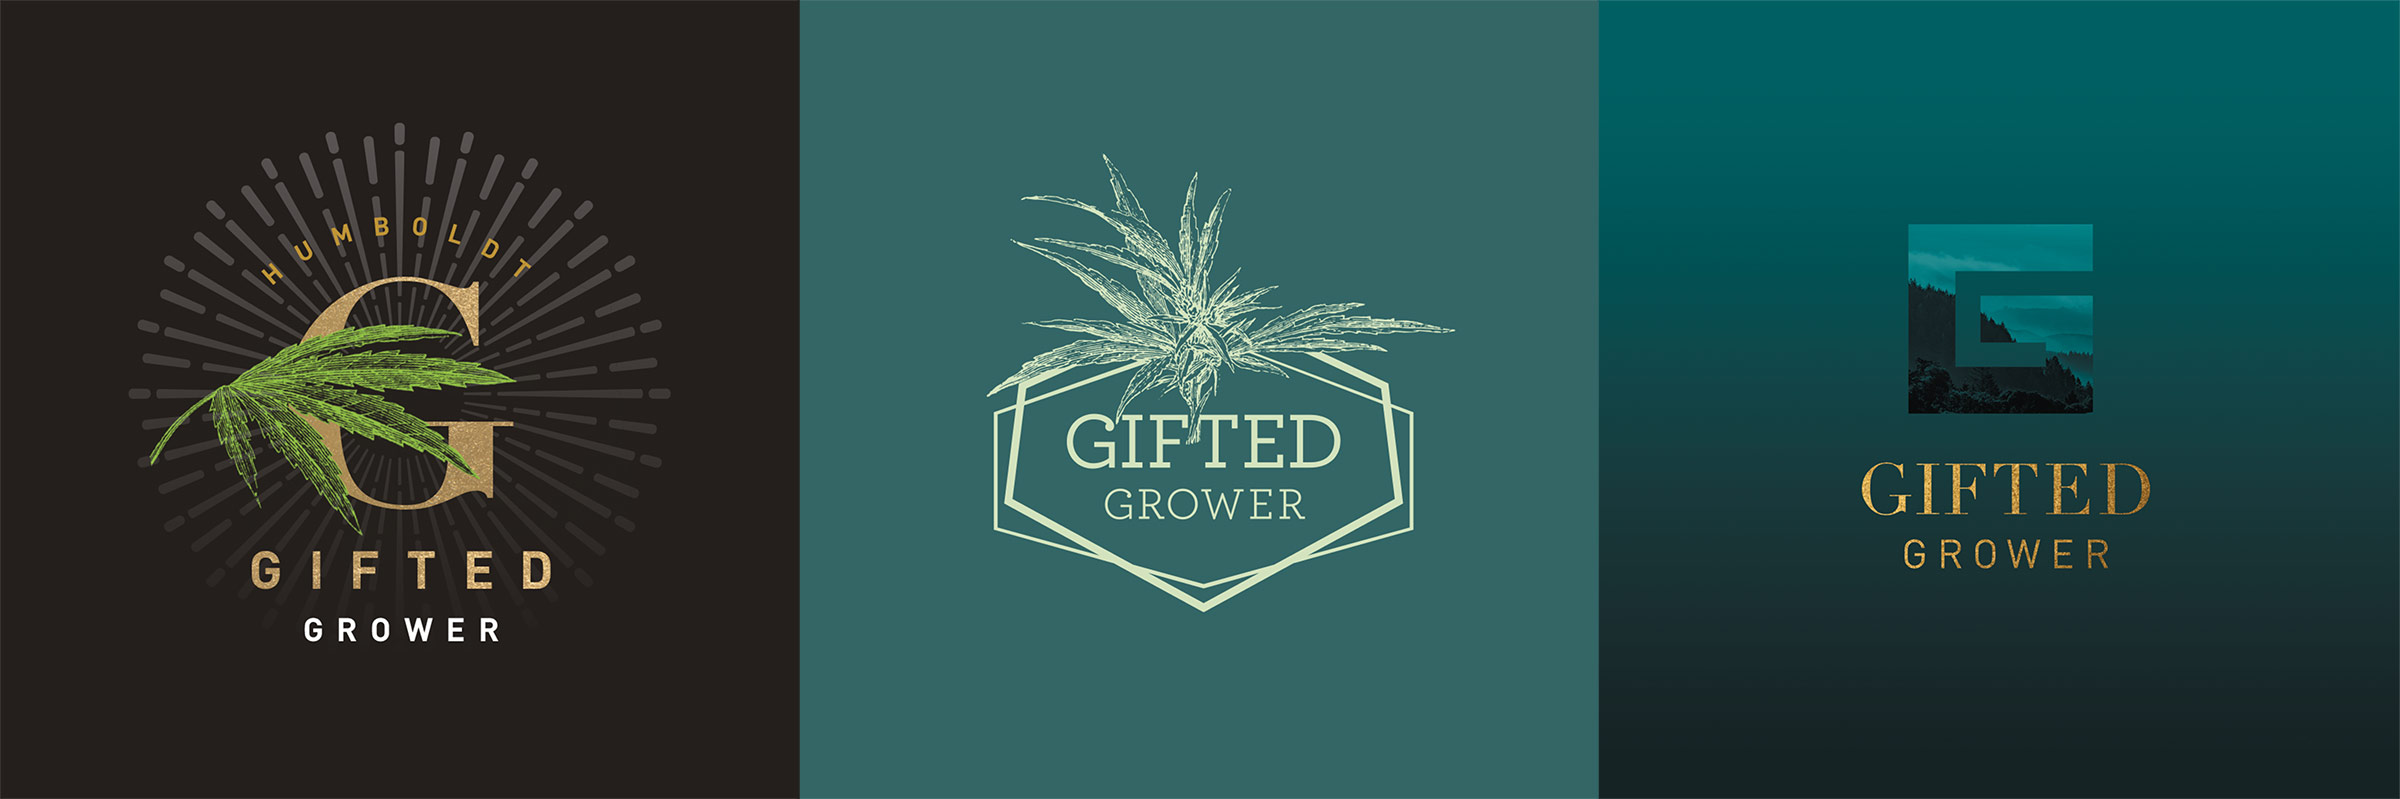 Gifted Grower brand design